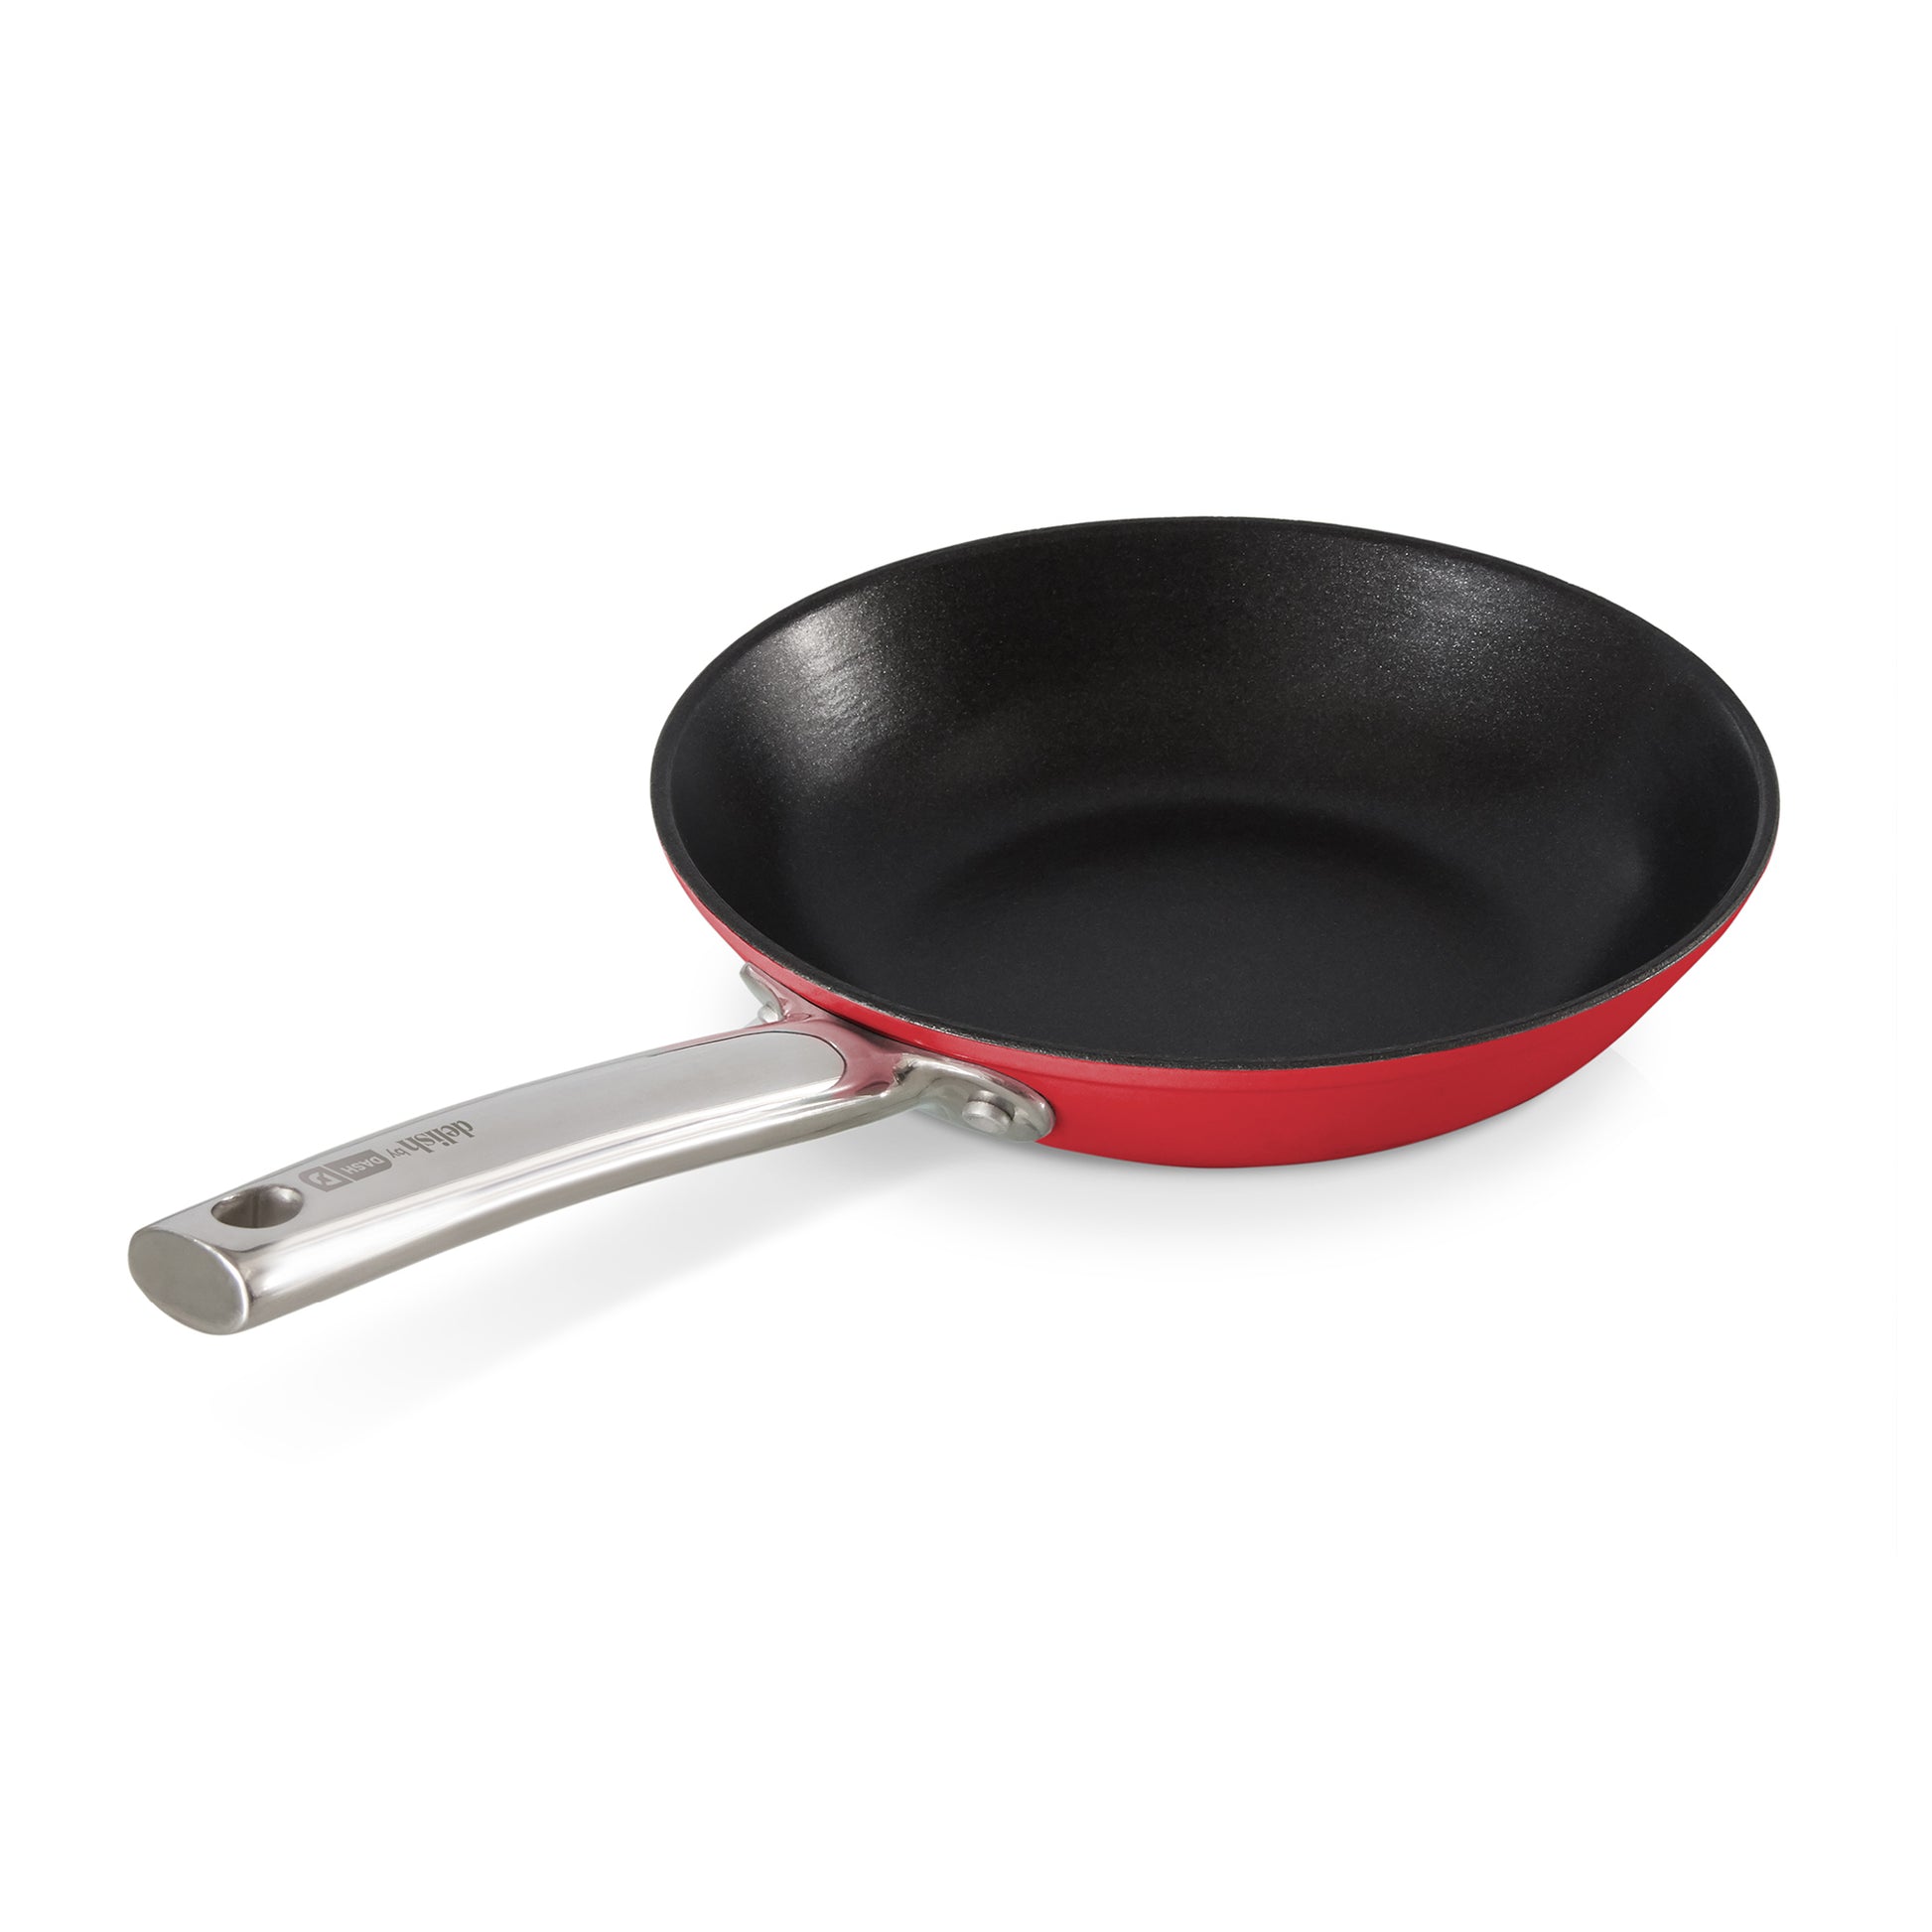 Zakarian by Dash 8 Colored Cast-Iron Skillet ,Cranberry